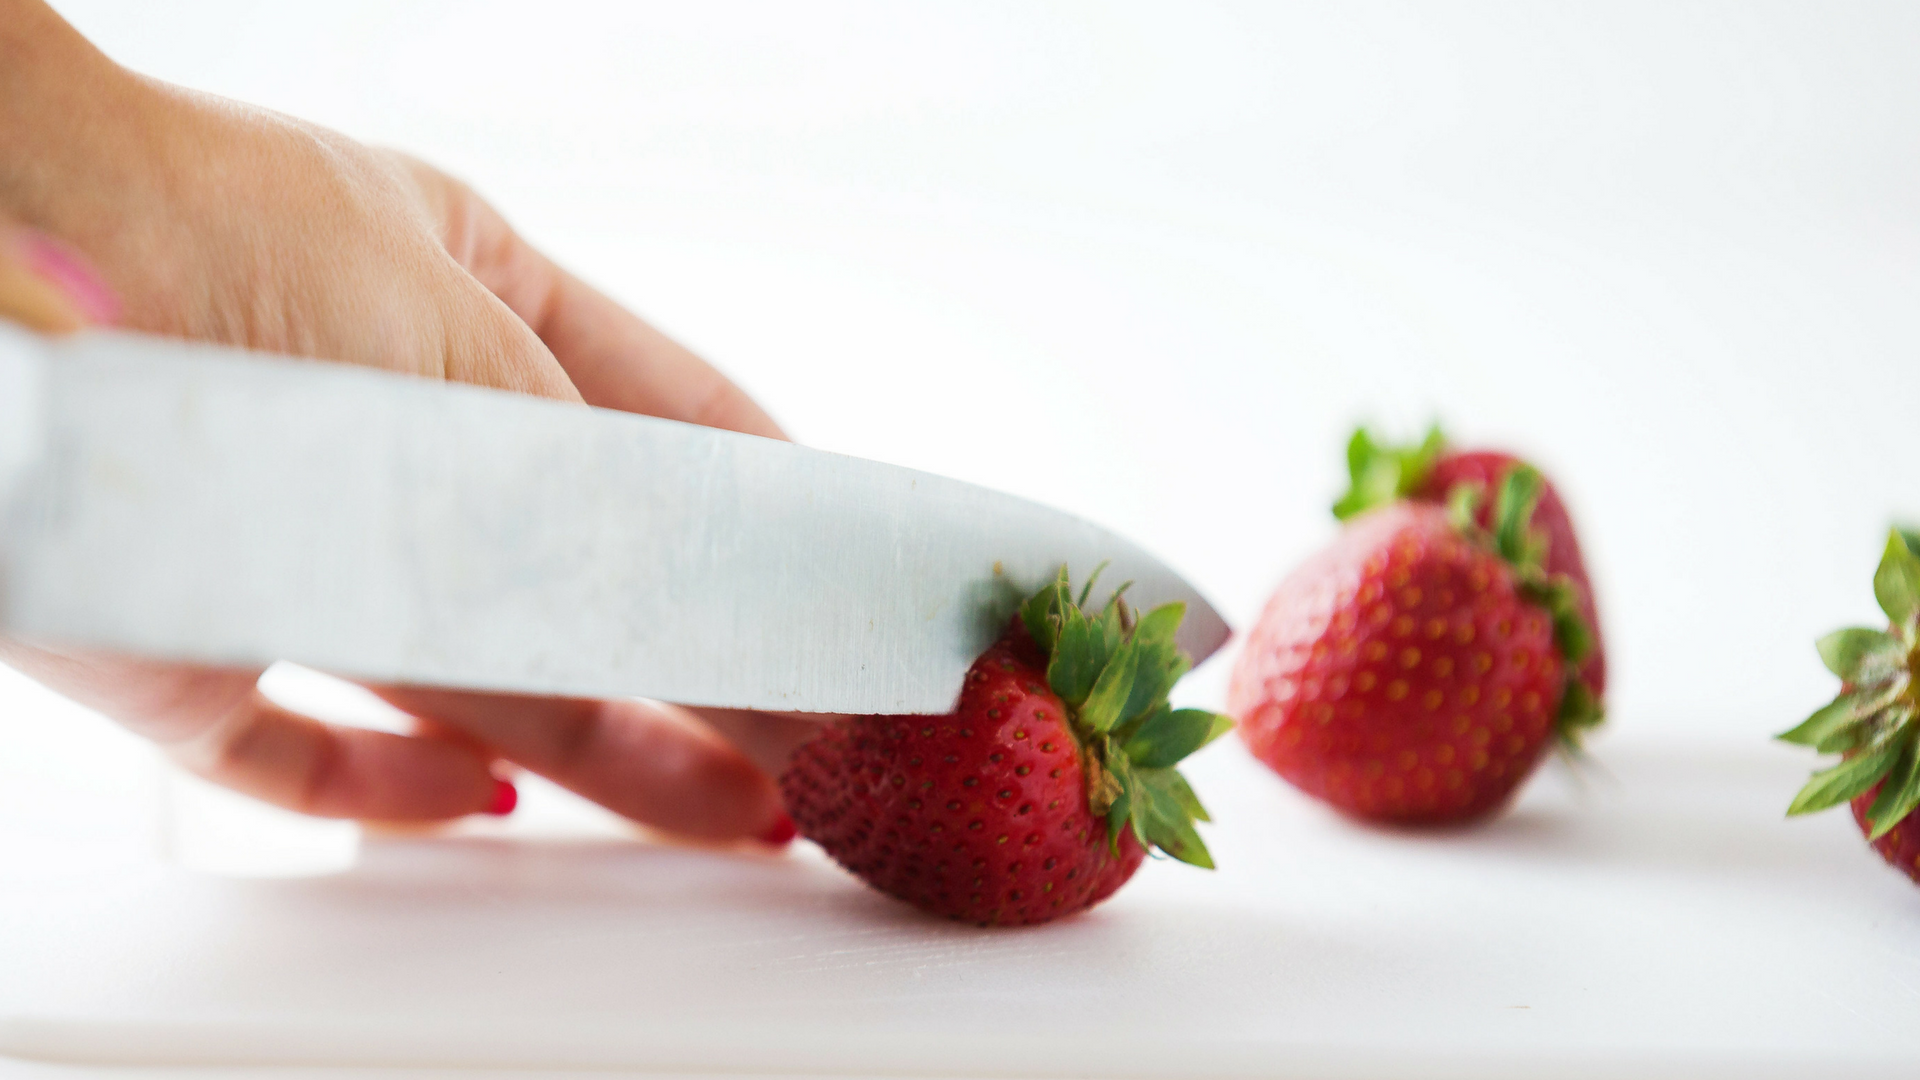 Slicing strawberries on a cutting board